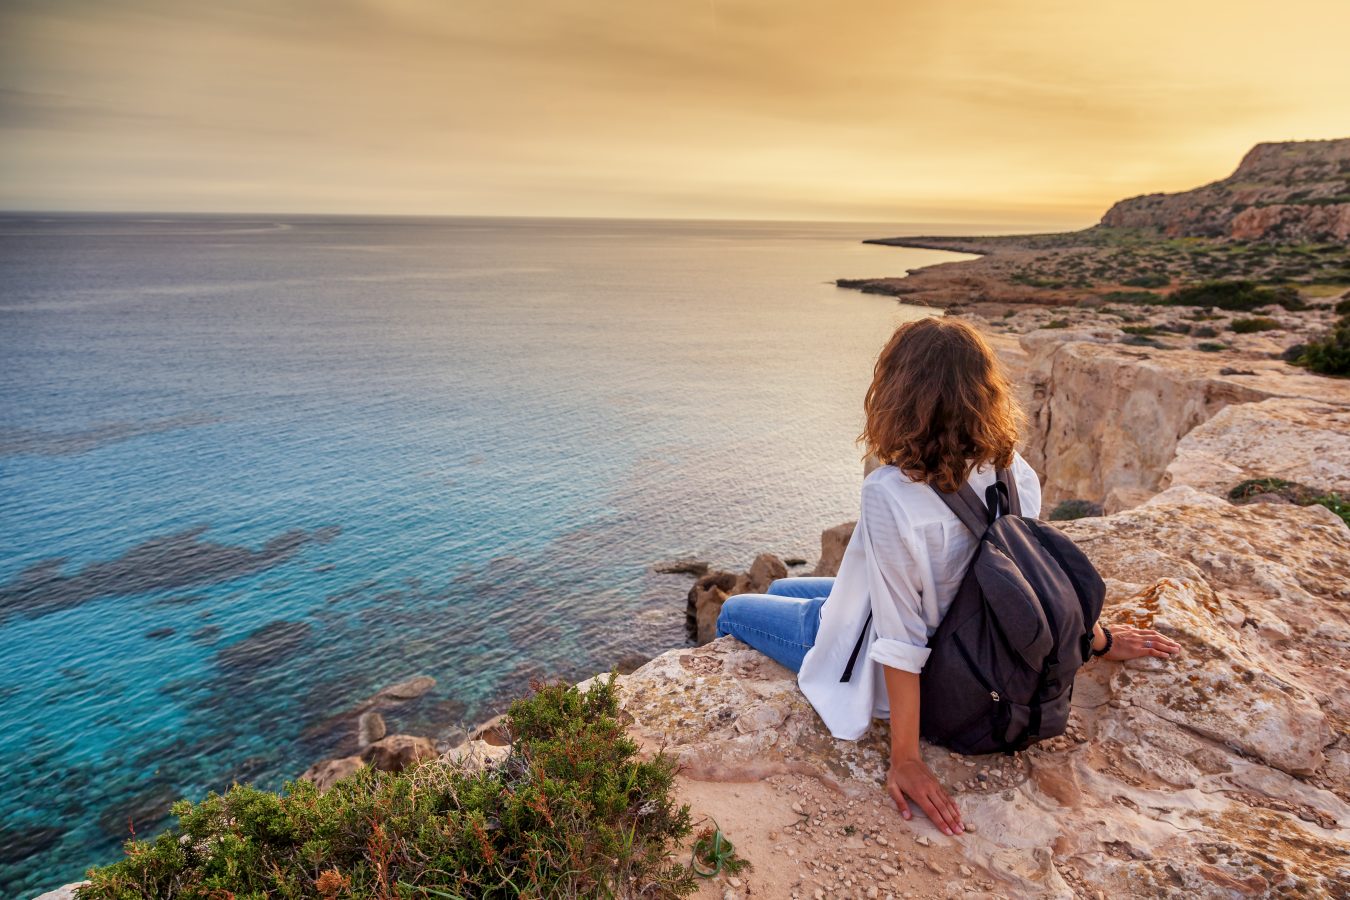 A young woman traveler watches a sunset on the rocks of a cliff overlooking the sea in Cyprus - a popular and cheap Europe destination for summer travel.